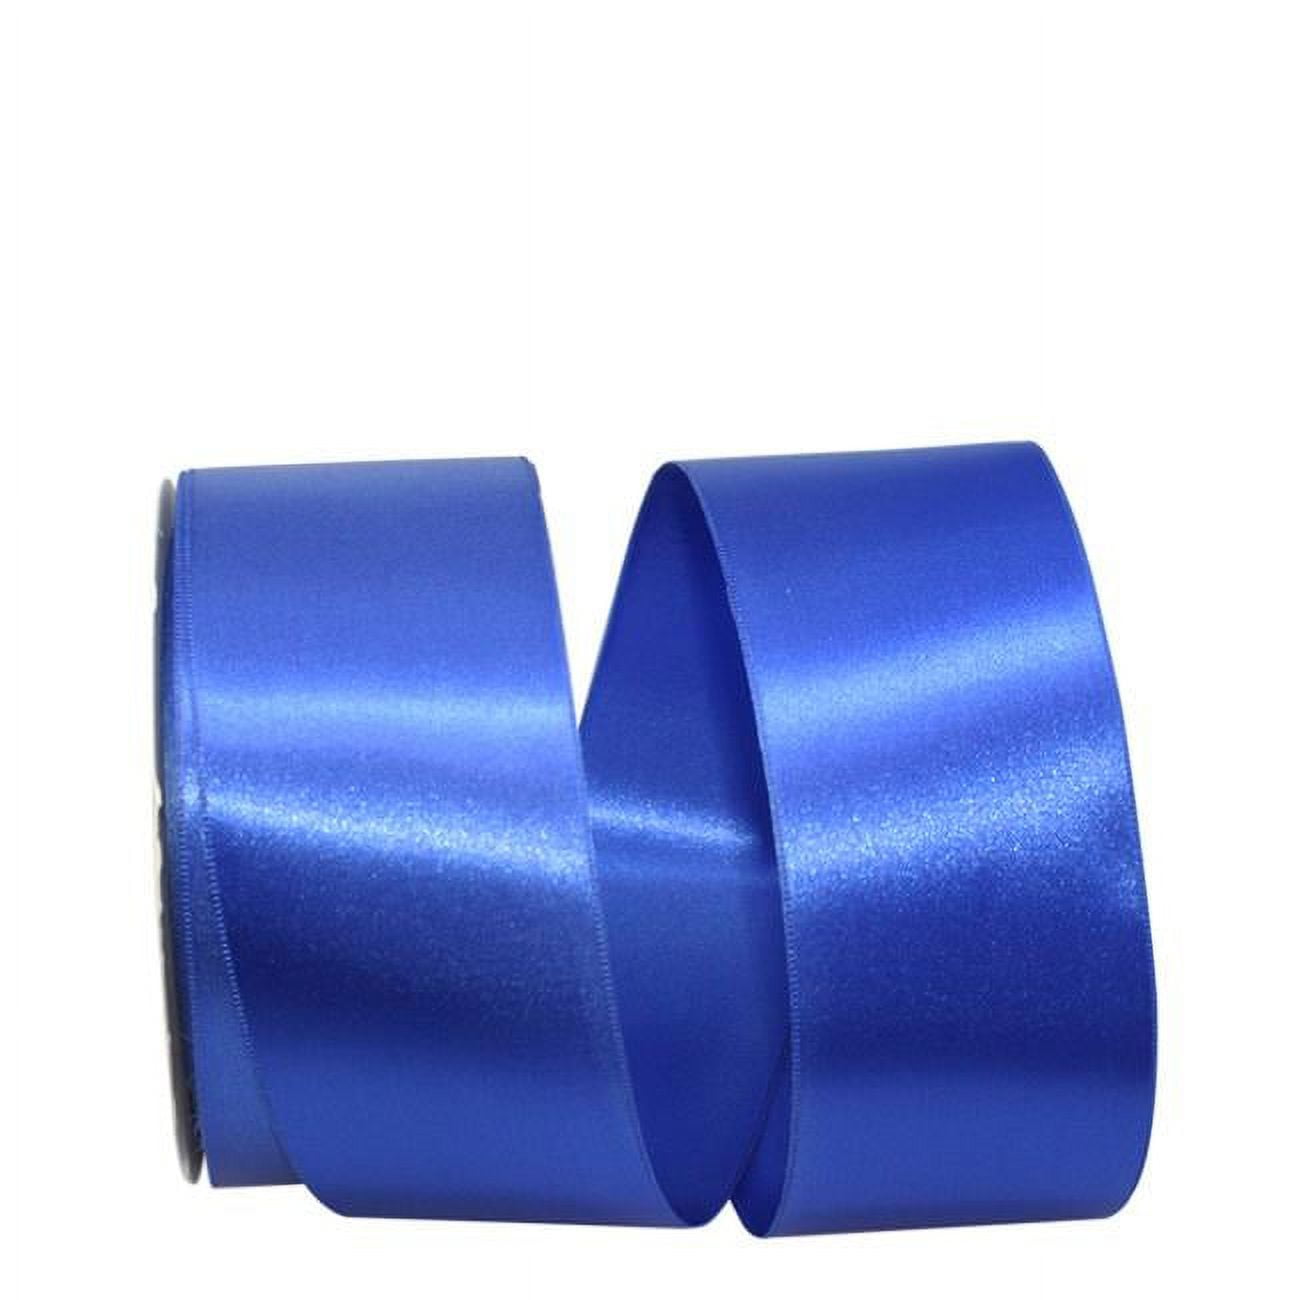 VATIN 1-1/2 Wide Double Faced Polyester Royal Blue/Sapphire Blue Satin  Ribbon Continuous Ribbon- 25 Yard, Perfect for Wedding, Gift Wrapping, Bow